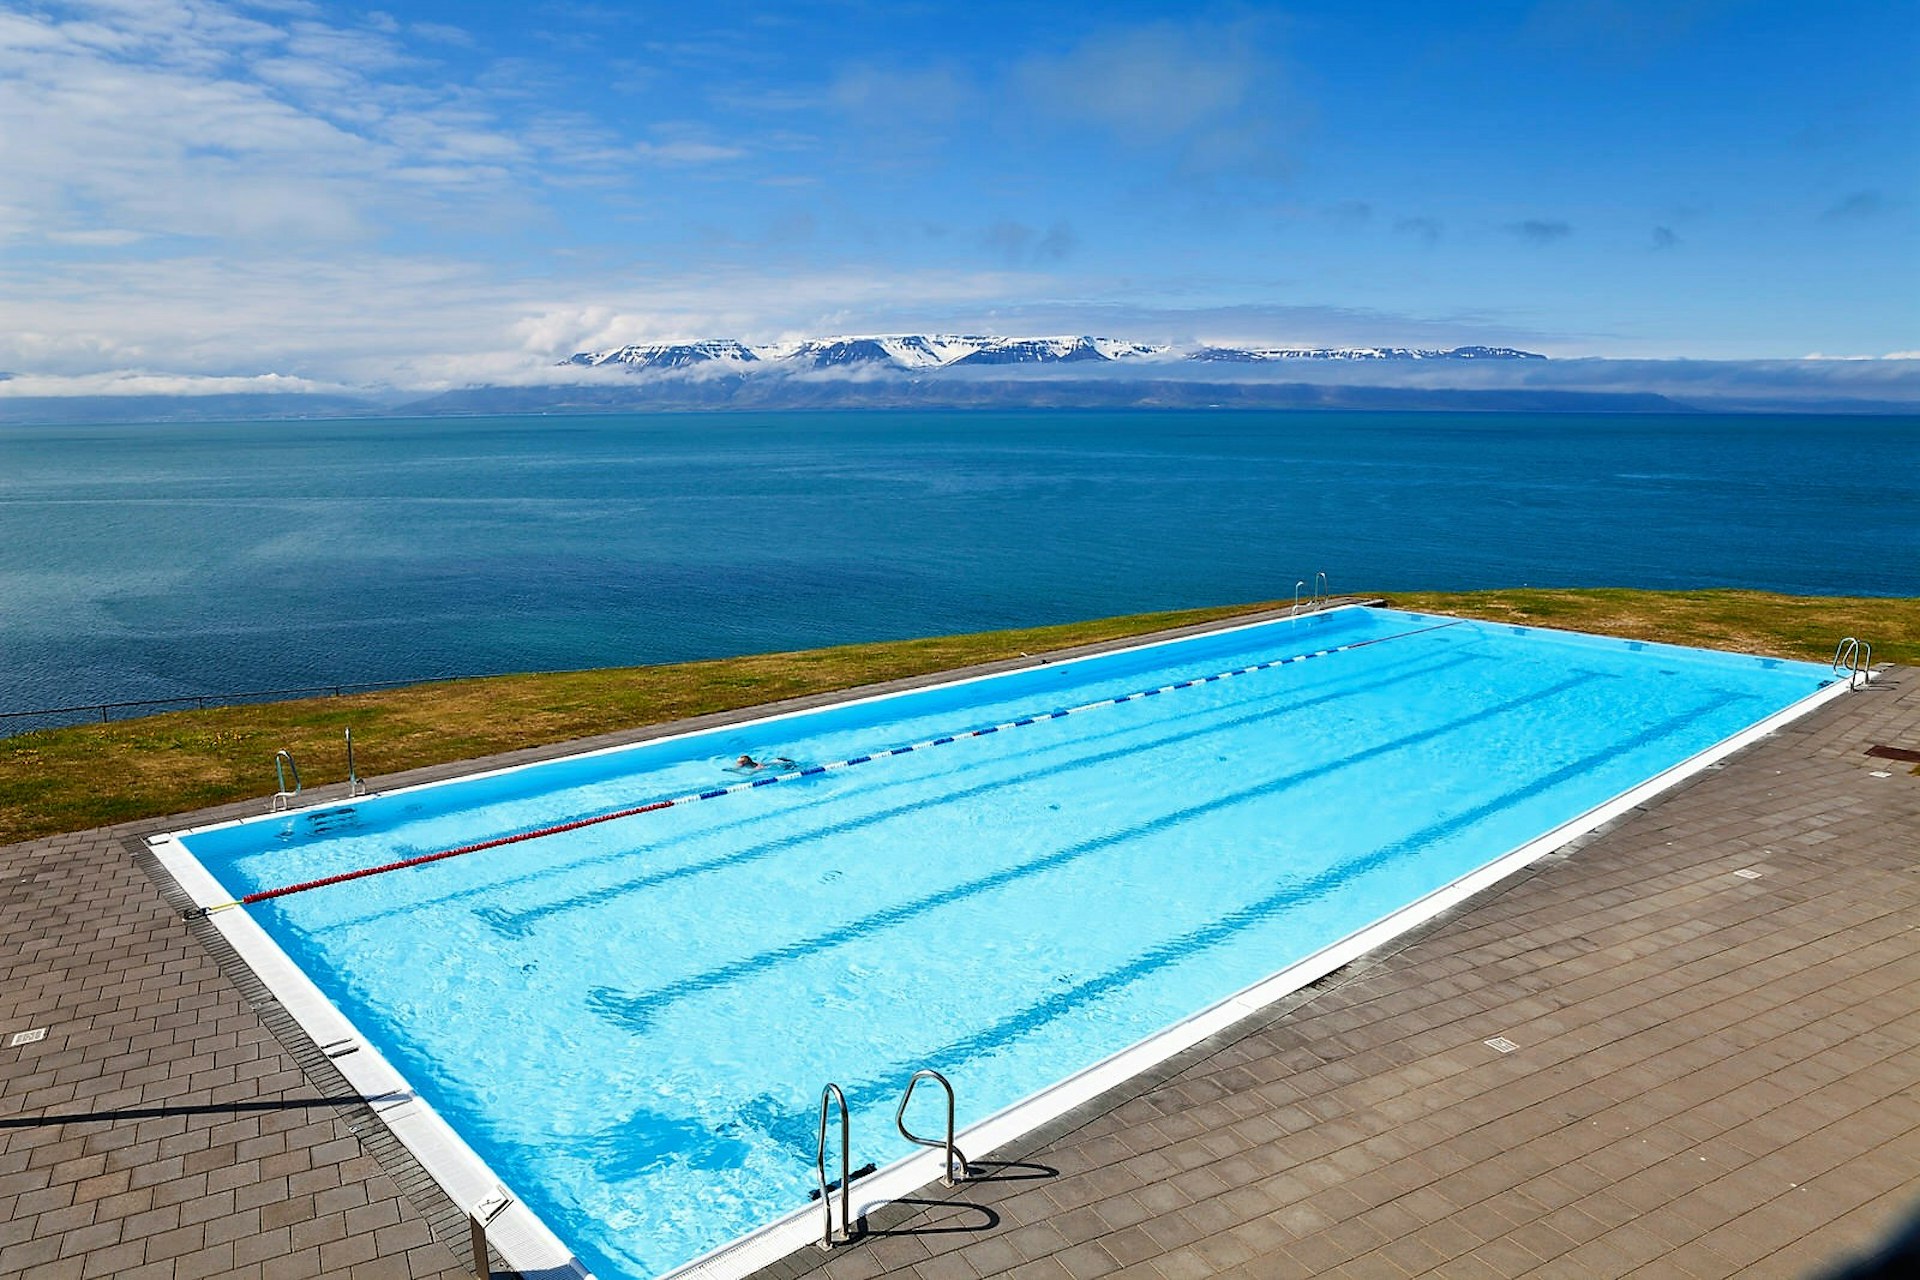 Outdoor swimming pool on the side of a fjord with mountains in the distance